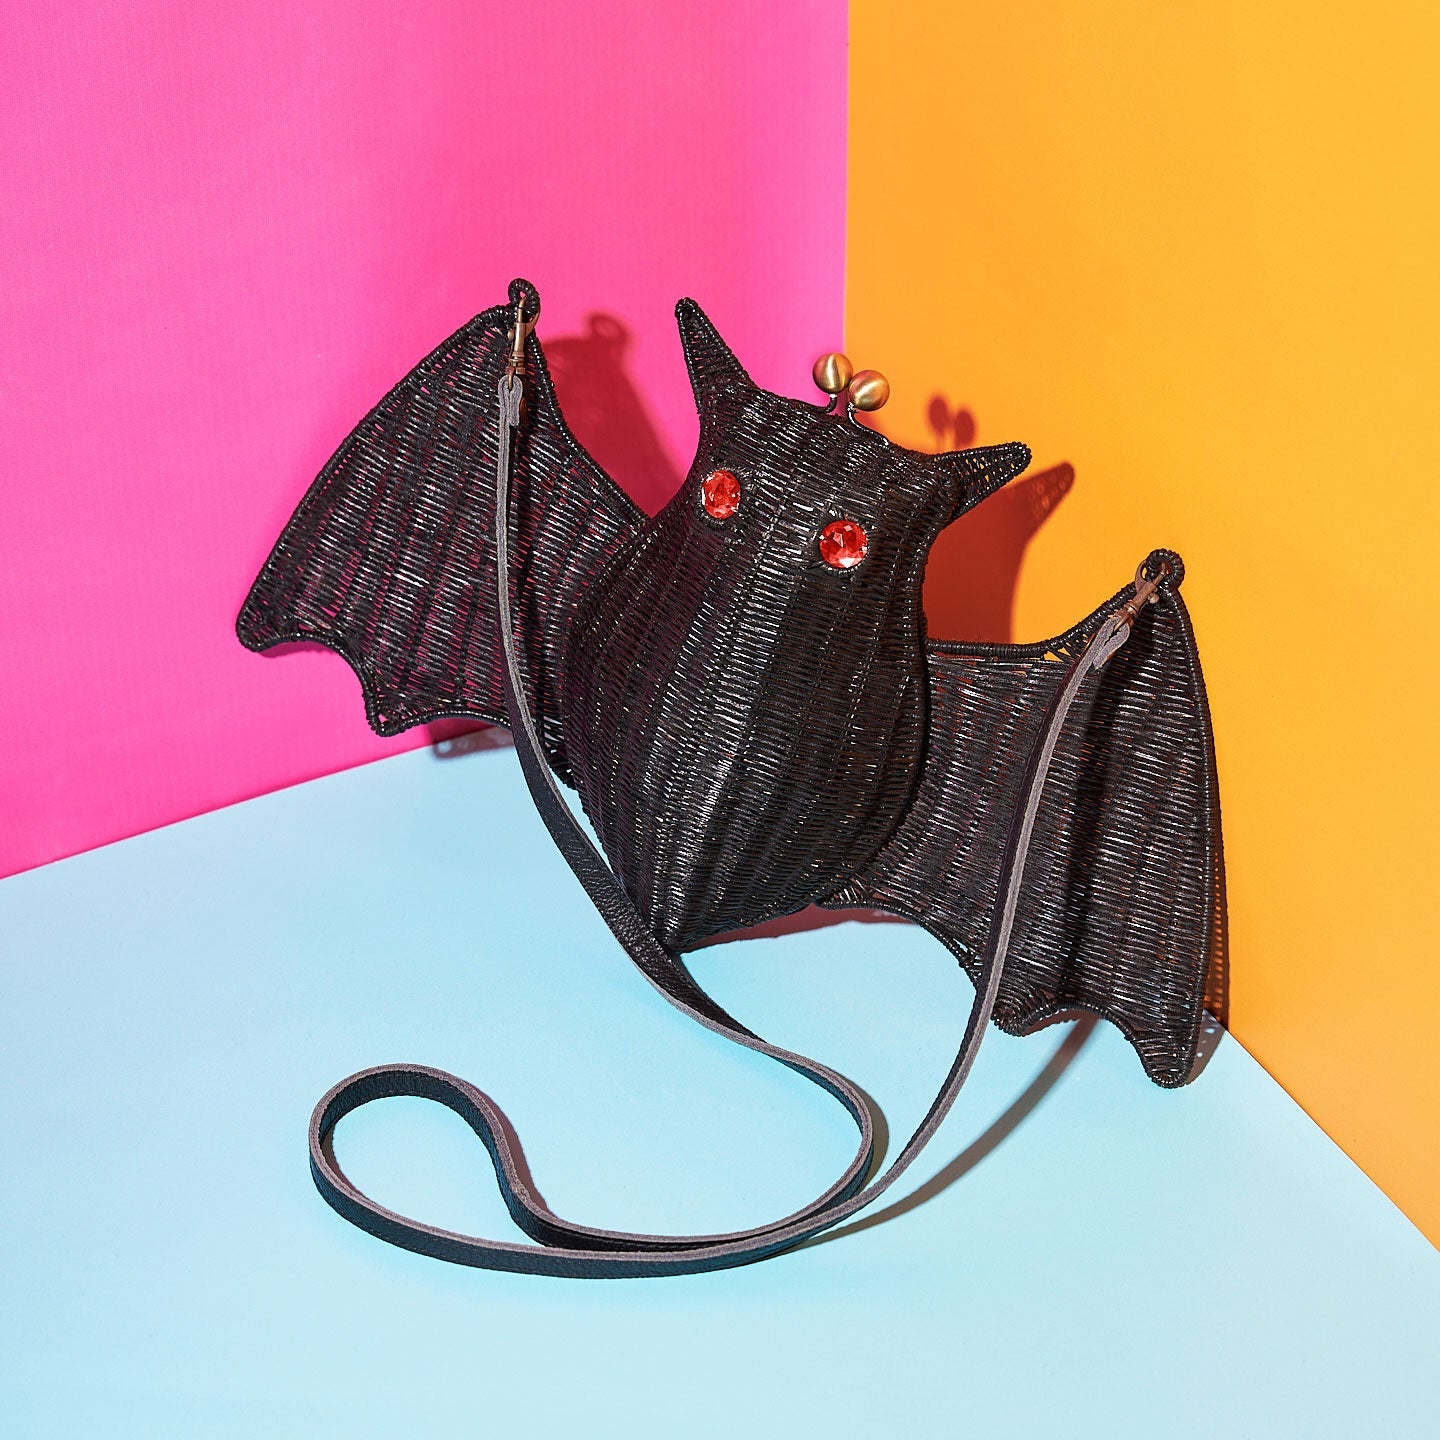 Wicker Darling's Battie Page the bat purse on a vibrant background